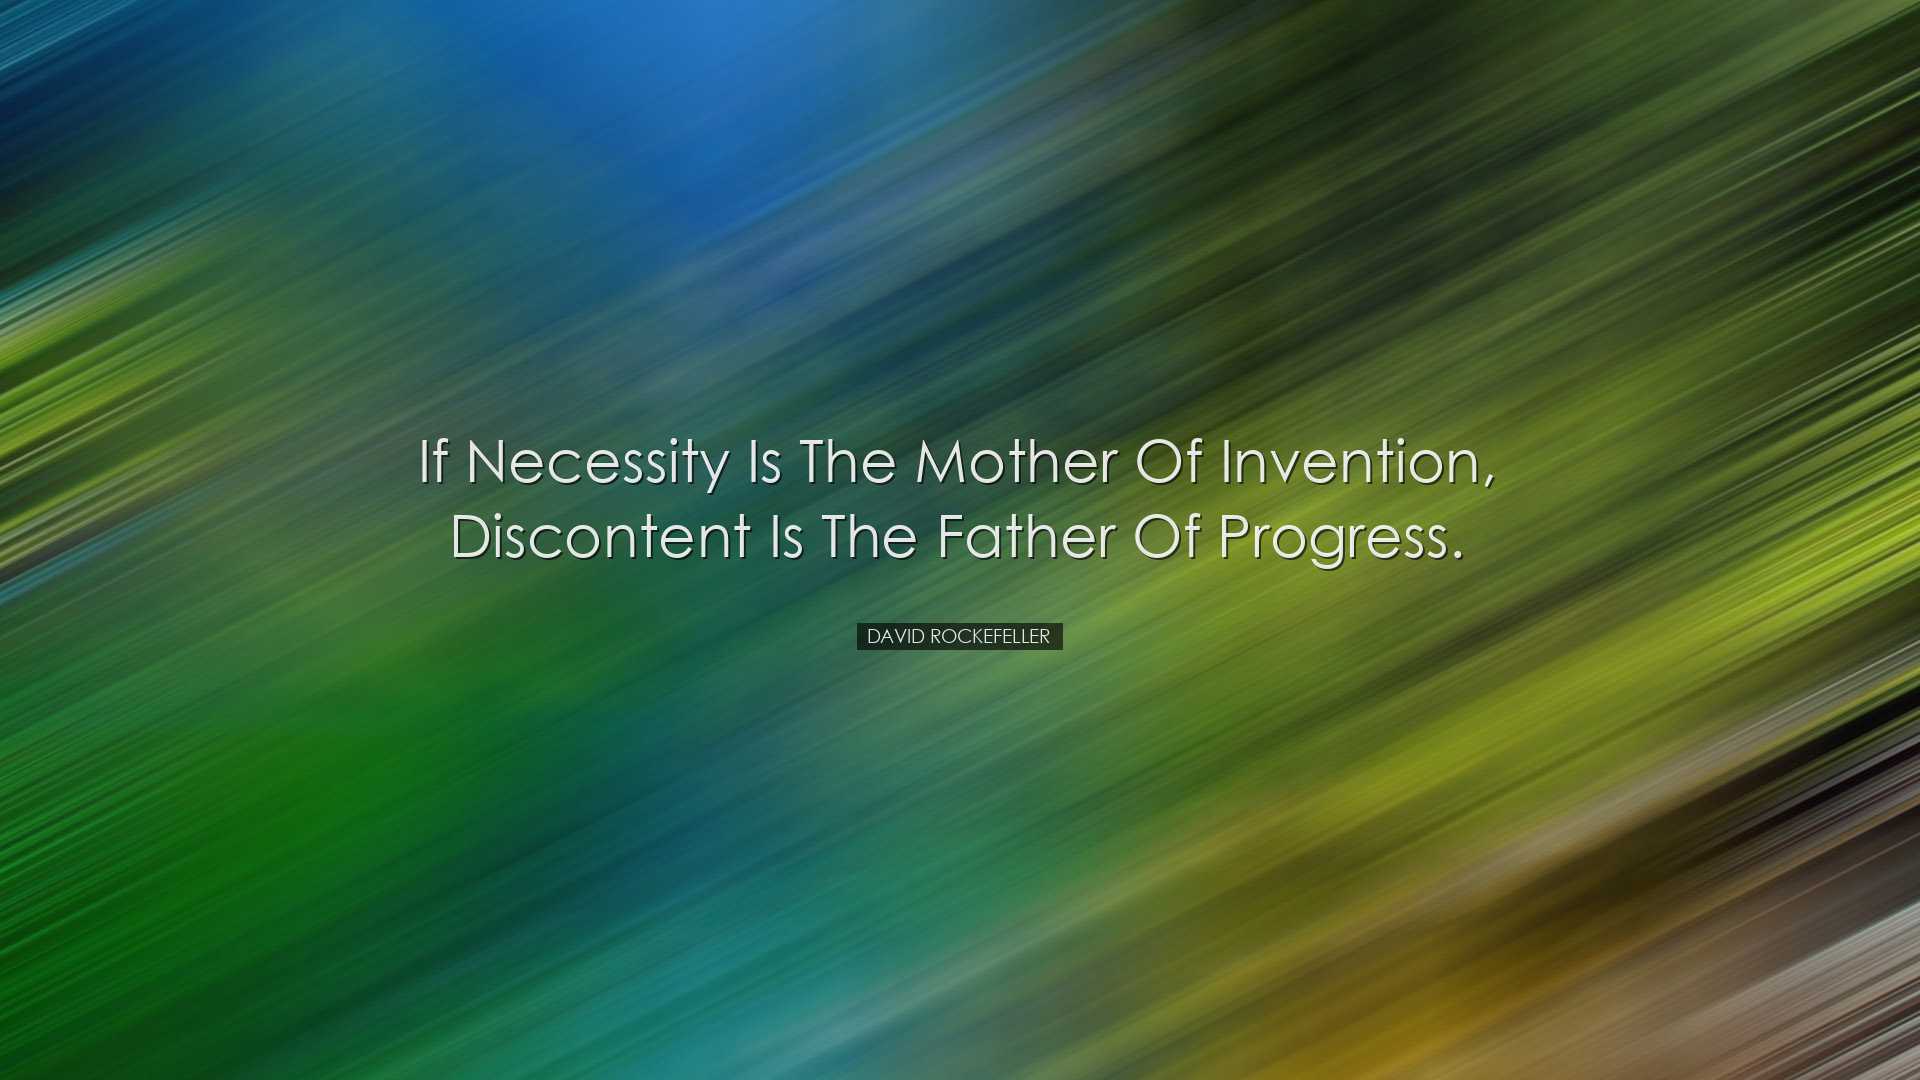 If necessity is the mother of invention, discontent is the father